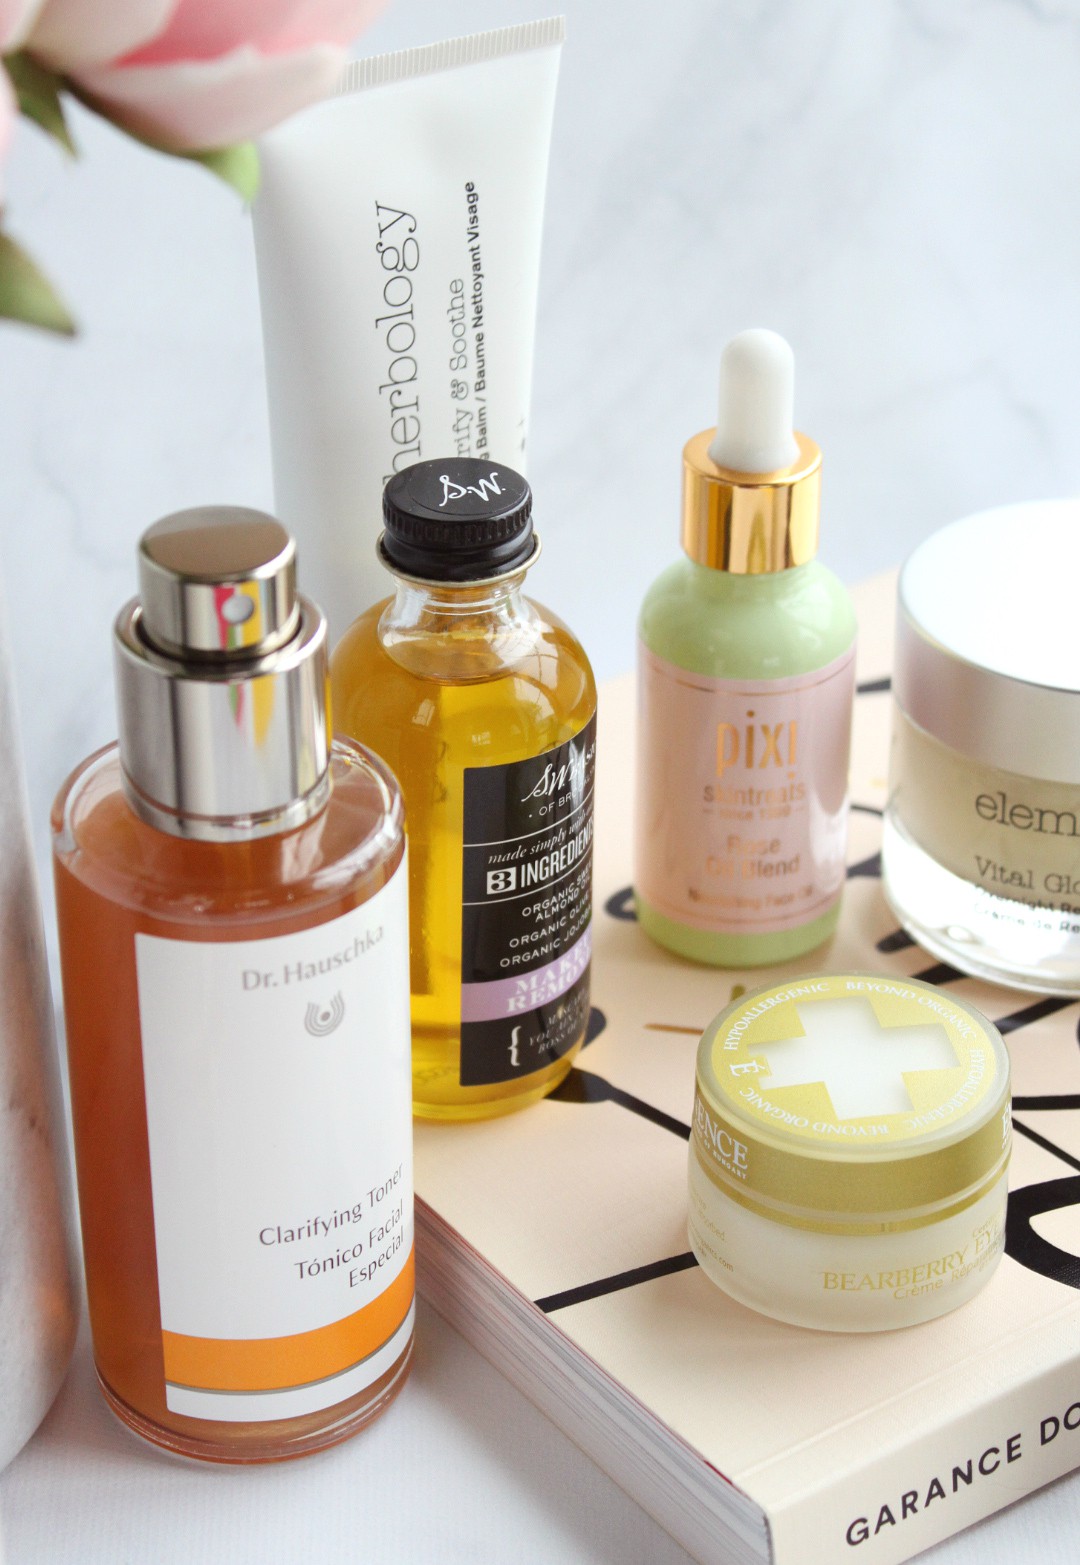 My Clean, Natural & Non-Toxic PM Beauty Routine - Glamorable